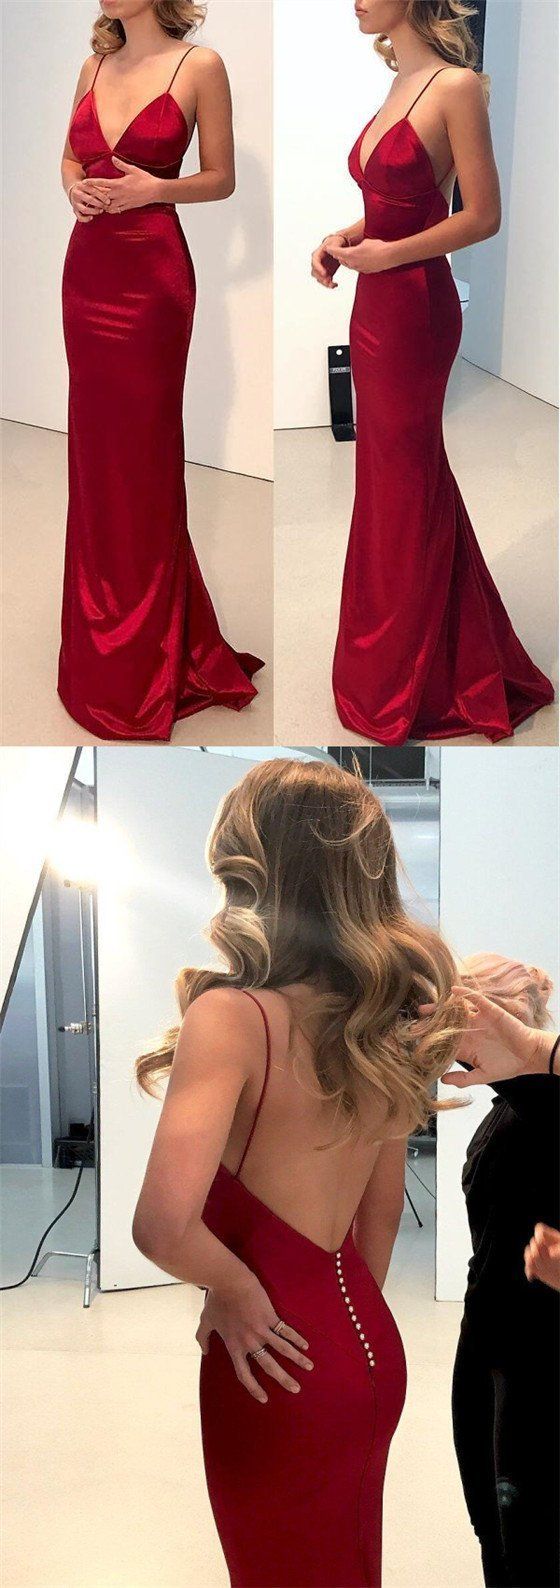 Sexy Mermaid Prom Dresses, Evening Dress, Pageant Dance Dresses, Graduation School Party Gown, PC0005 - Promcoming